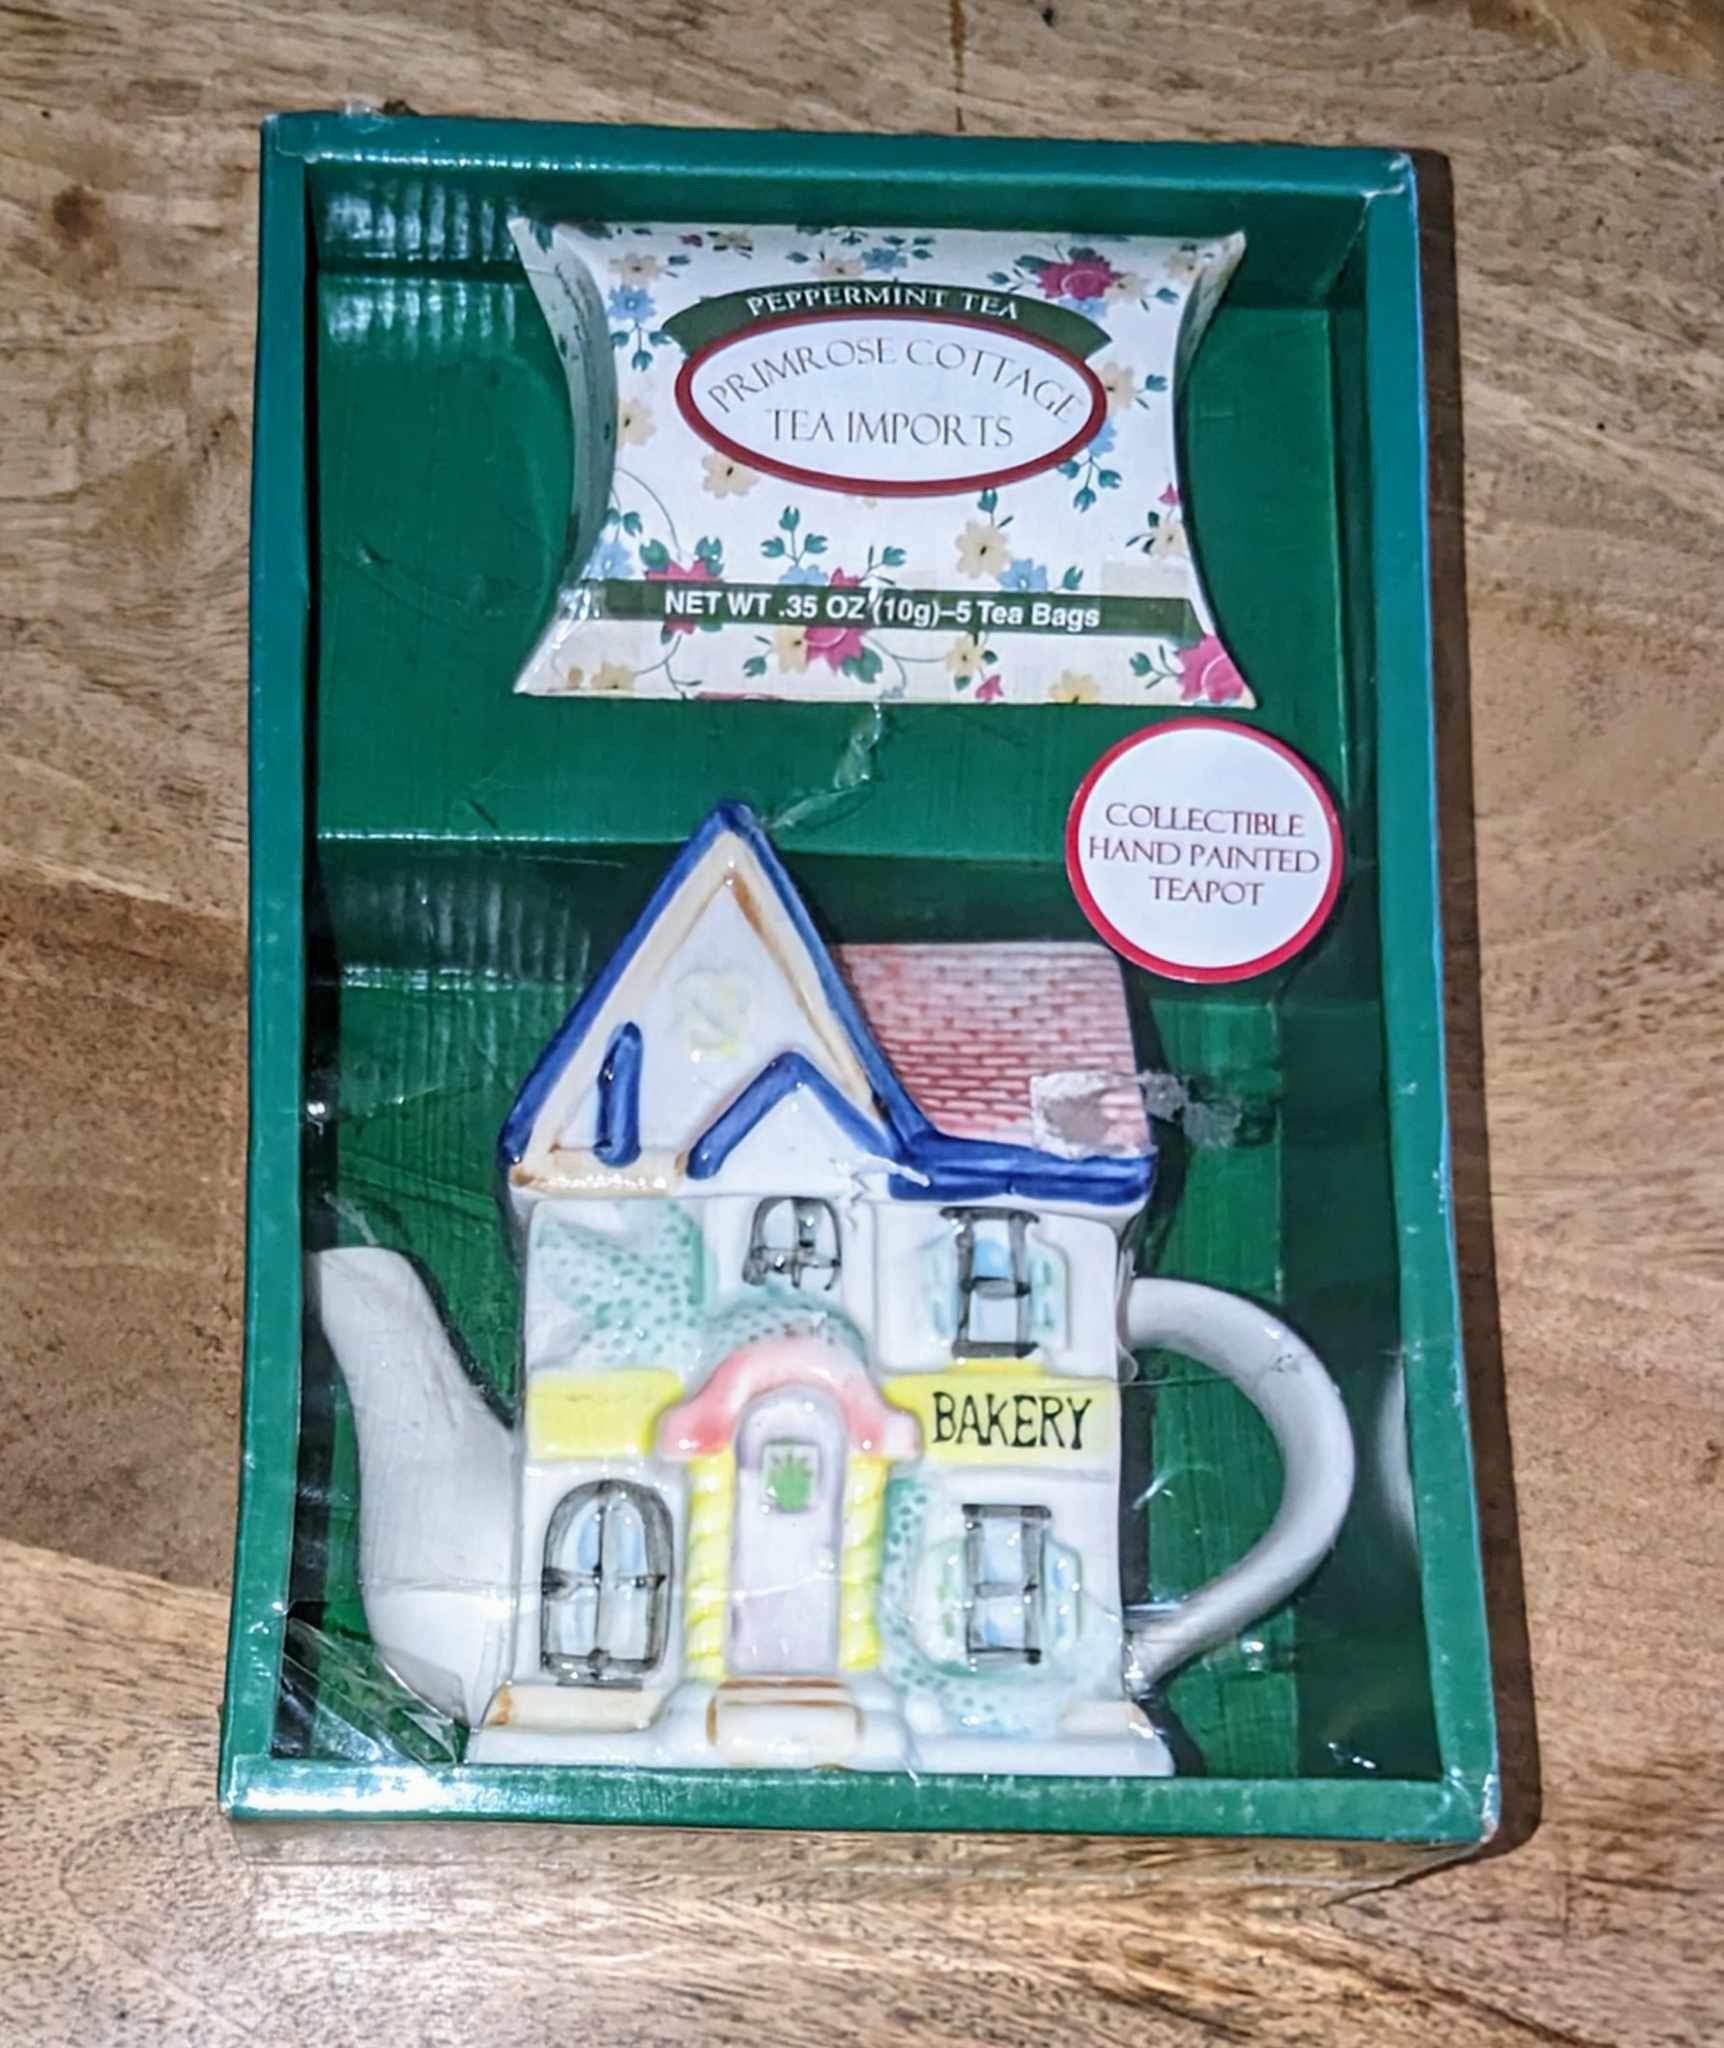 Primrose Cottage Tea Collectible Hand Painted Teapot Peppermint Bakery House New